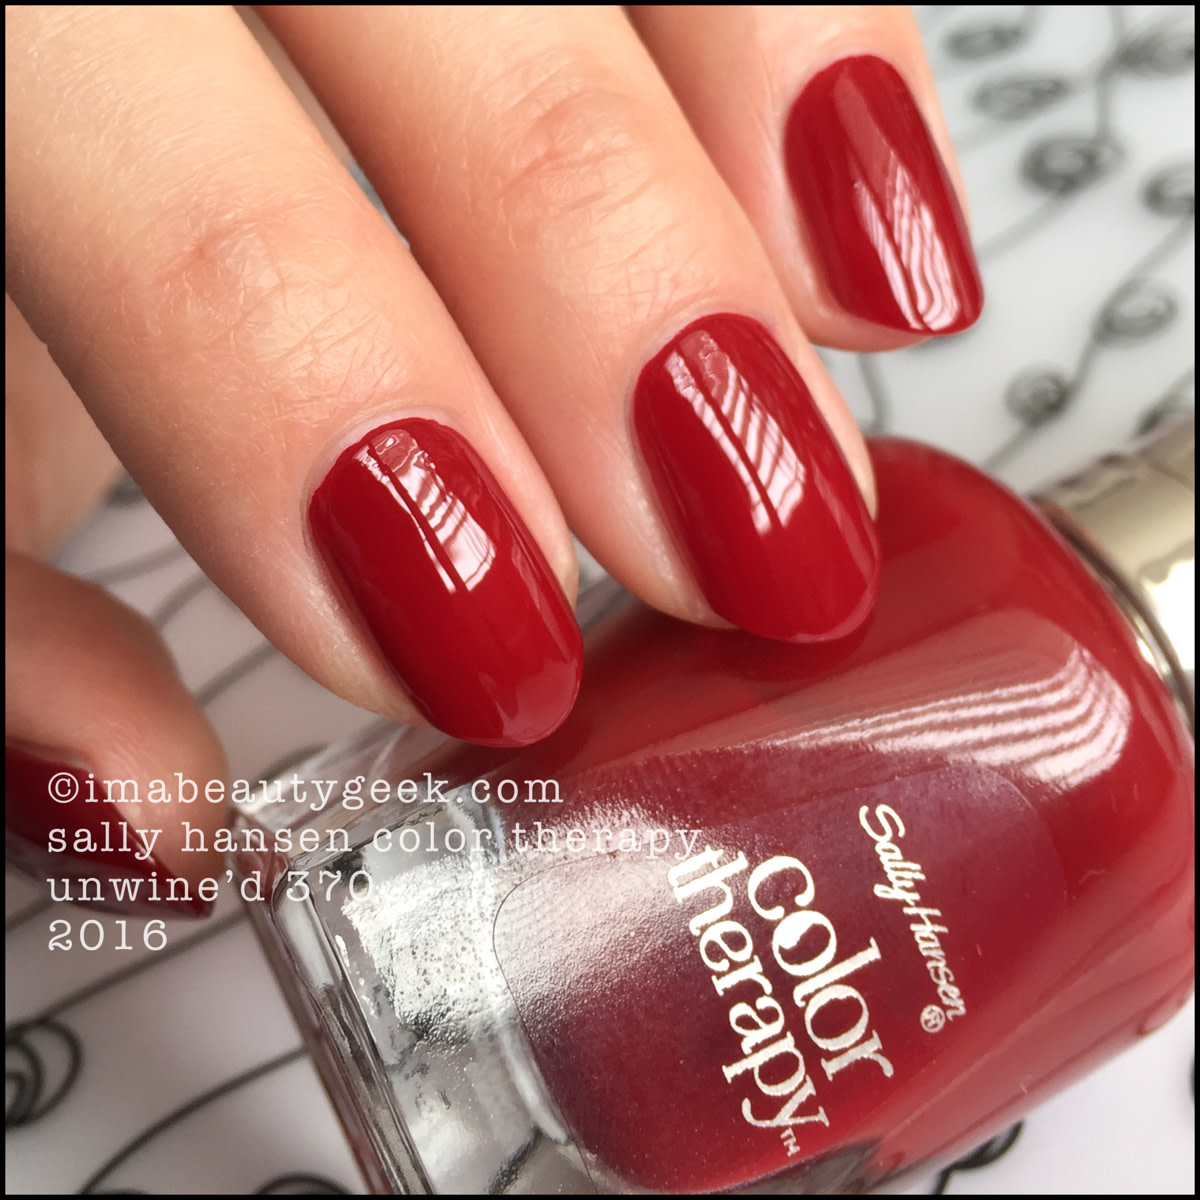 Sally Hansen Color Therapy Unwined 370_Sally Hansen Color Therapy Review Swatches